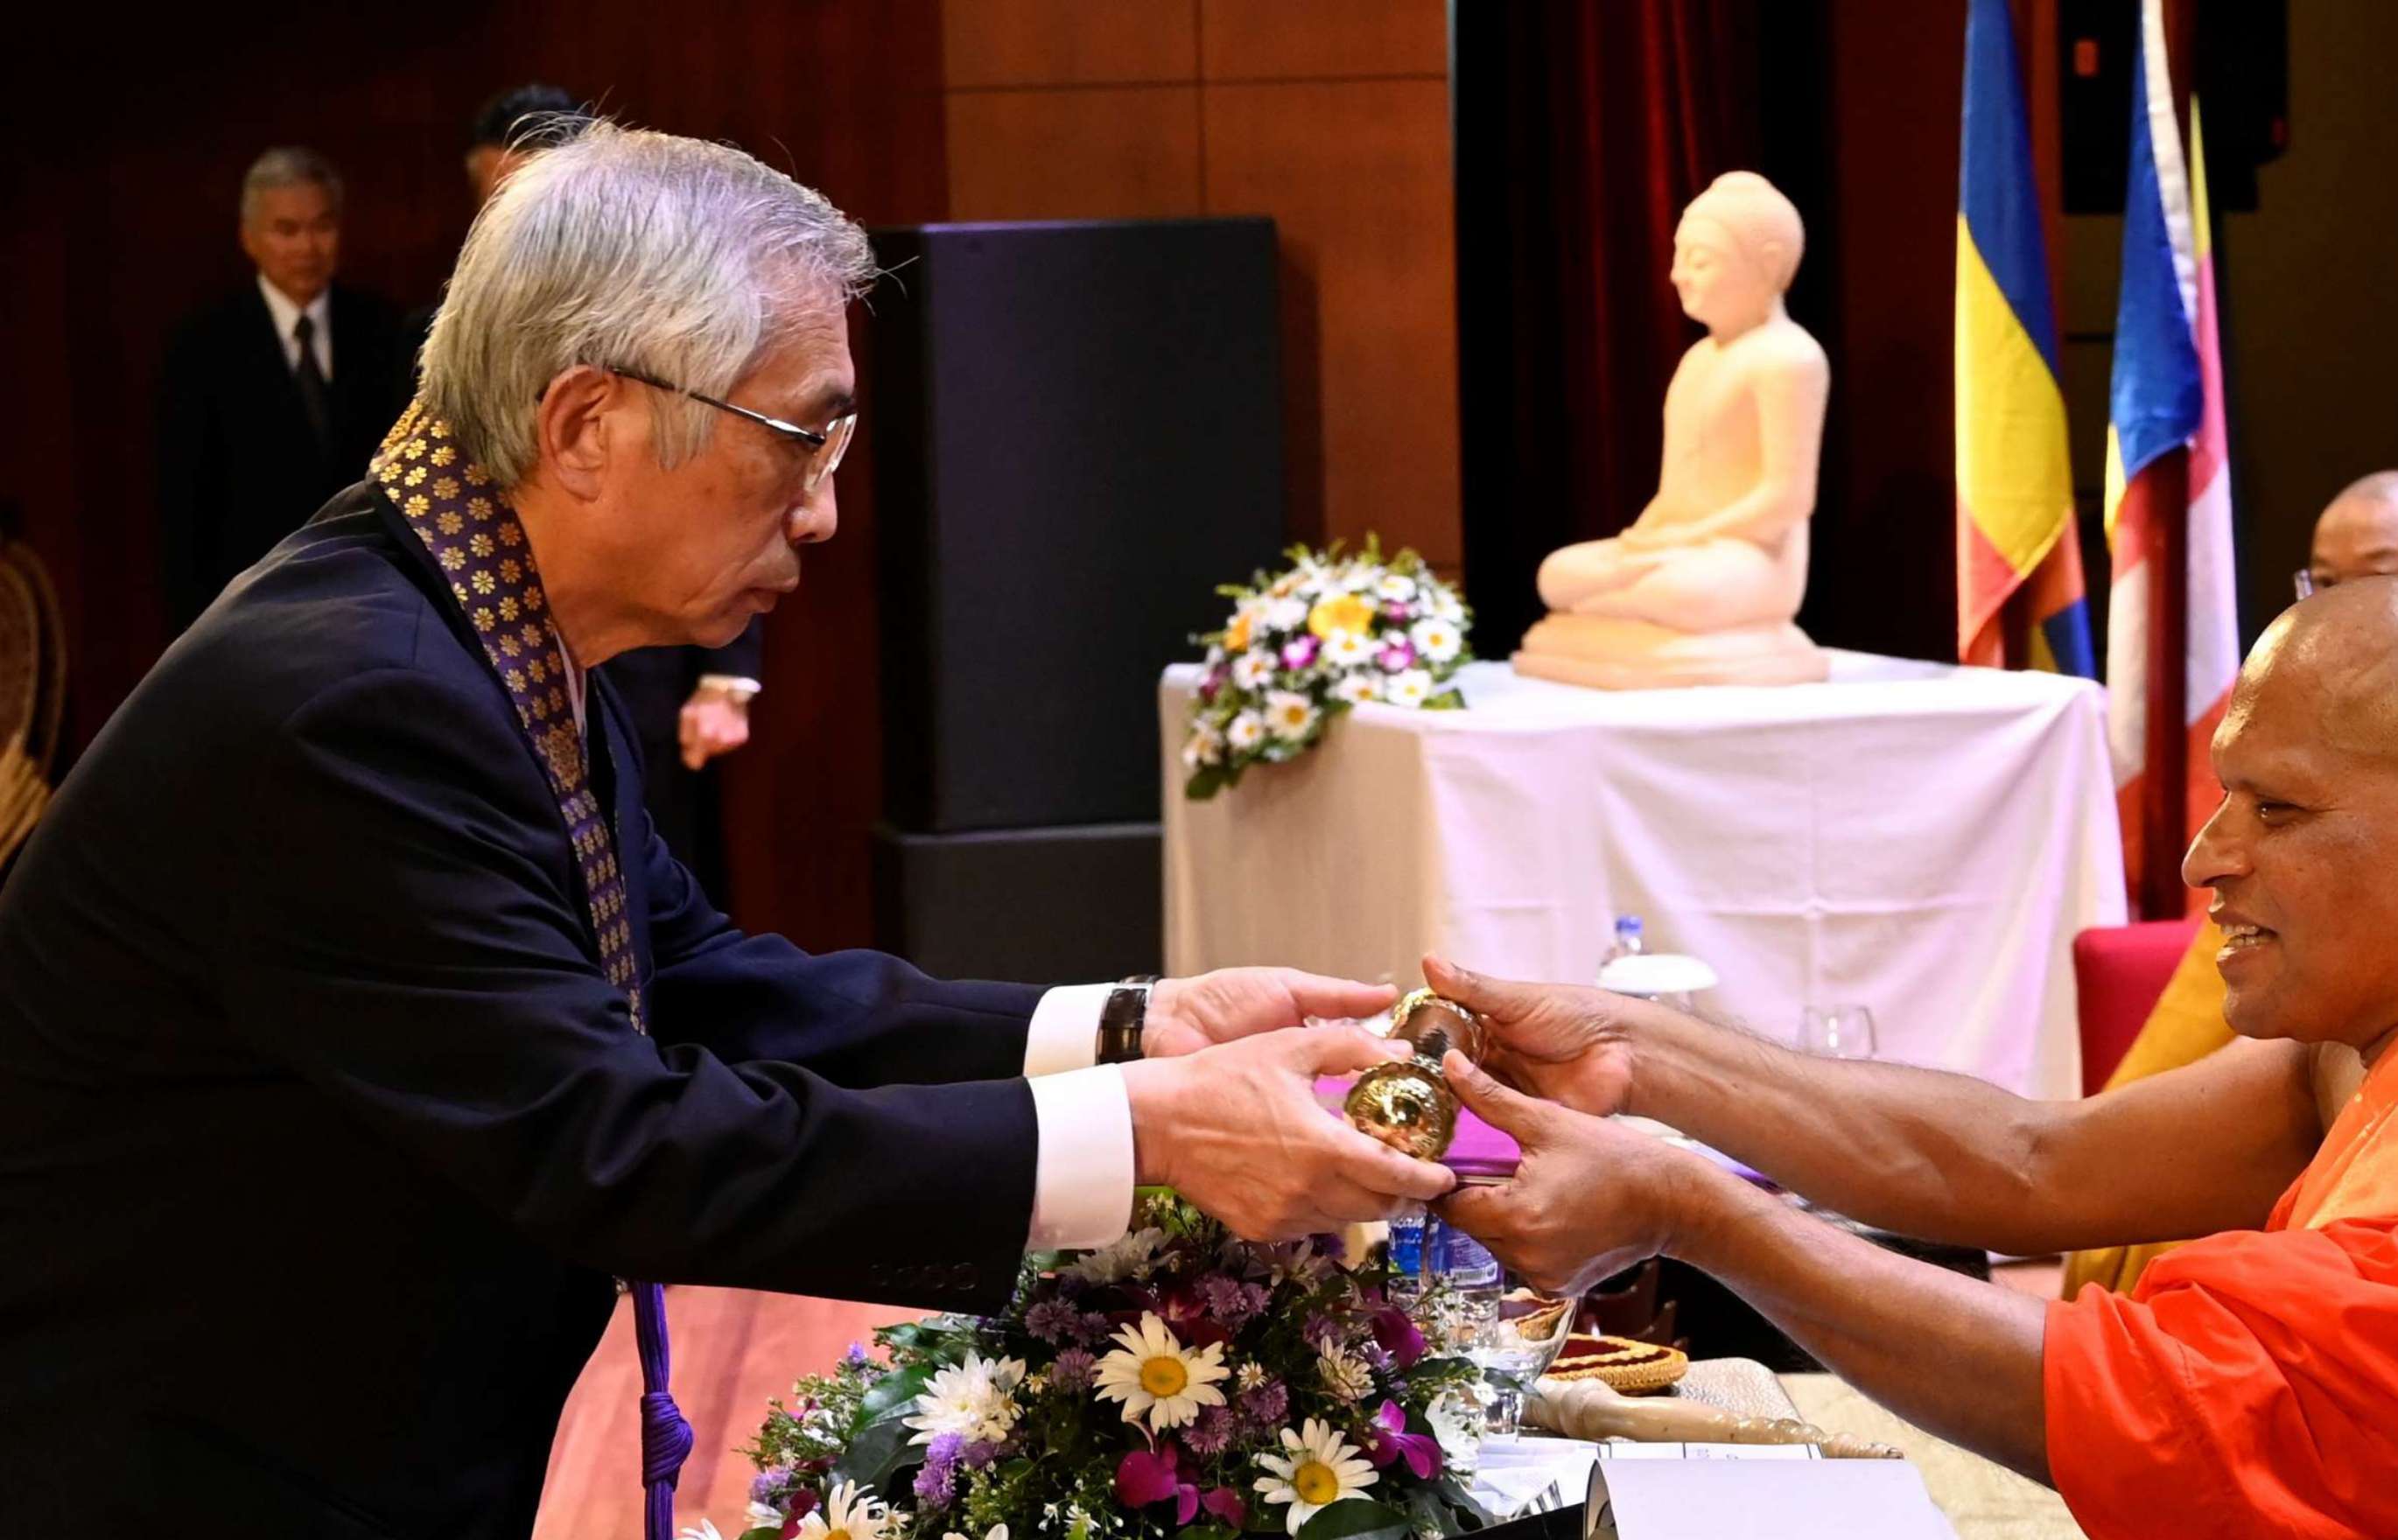 A standing gray-haired man in a suit, wearing a kesa around his neck, accepts a golden cylinder from a seated shaven-headed monk in orange robes; a statue of Buddha can be seen in the background.